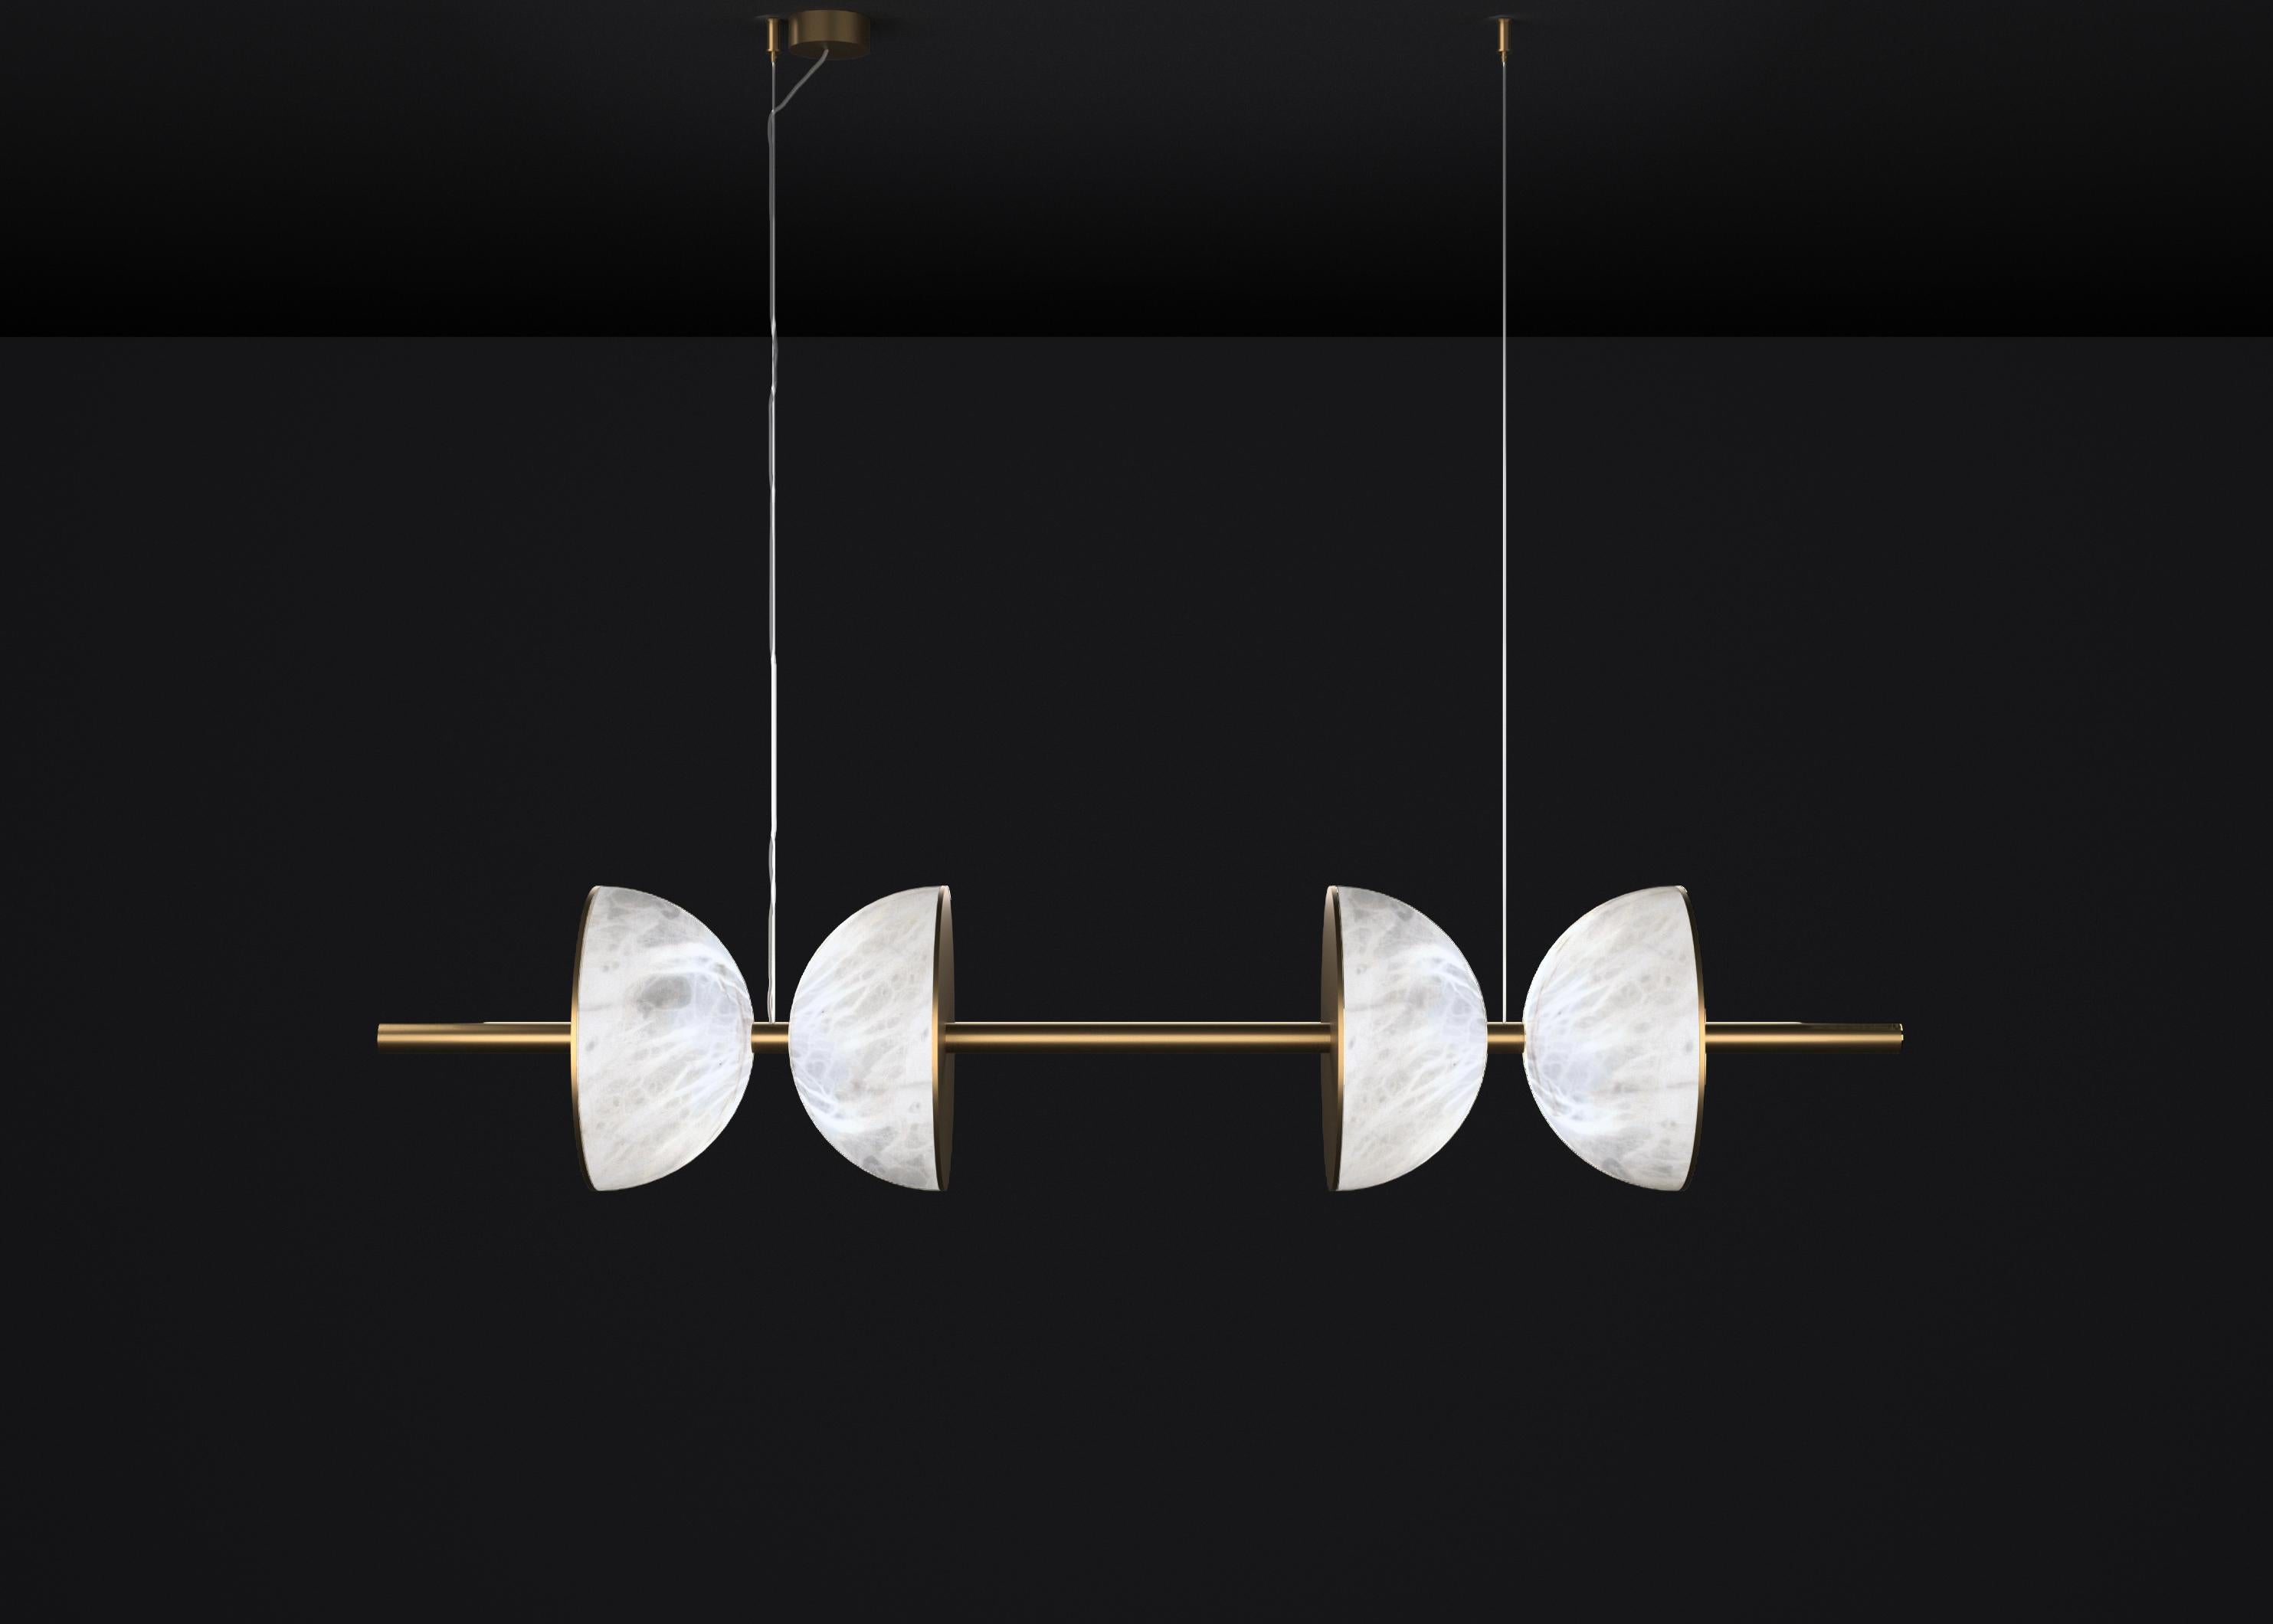 Ermes Bronze And Alabaster Pendant Light 2 by Alabastro Italiano
Dimensions: D 30 x W 150 x H 300 cm.
Materials: White alabaster and bronze.

Available in different finishes: Shiny Silver, Bronze, Brushed Brass, Ruggine of Florence, Brushed